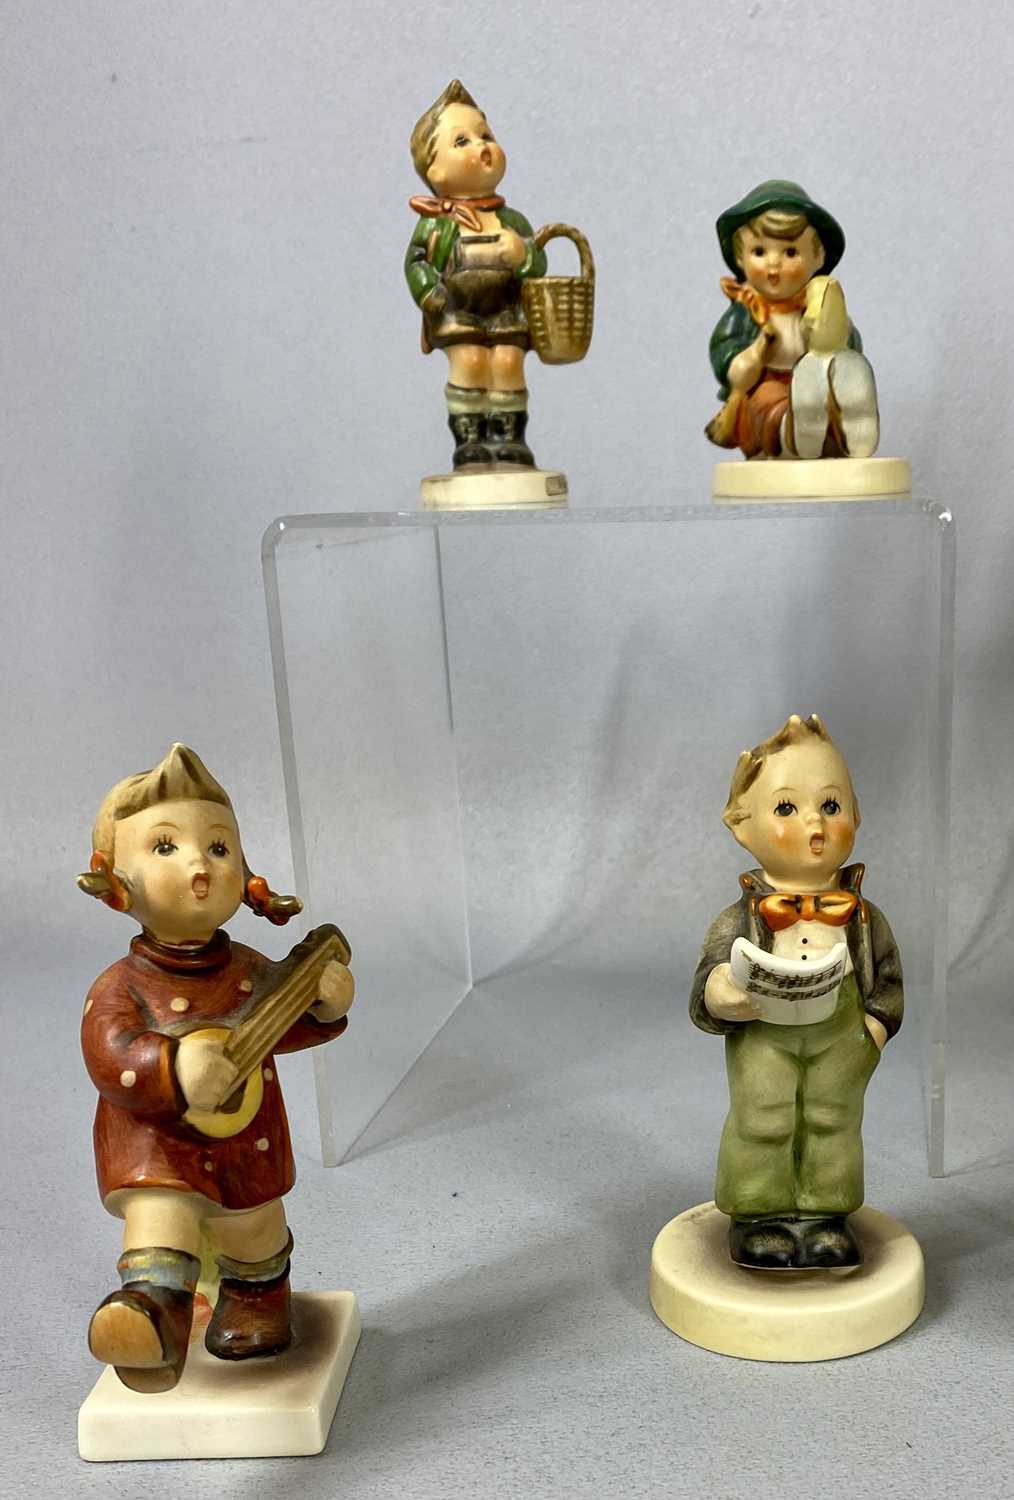 COLLECTION OF HUMMEL FIGURINES (20), including School Girl, The Lost Sheep, Singing Lesson, Happy - Image 4 of 4